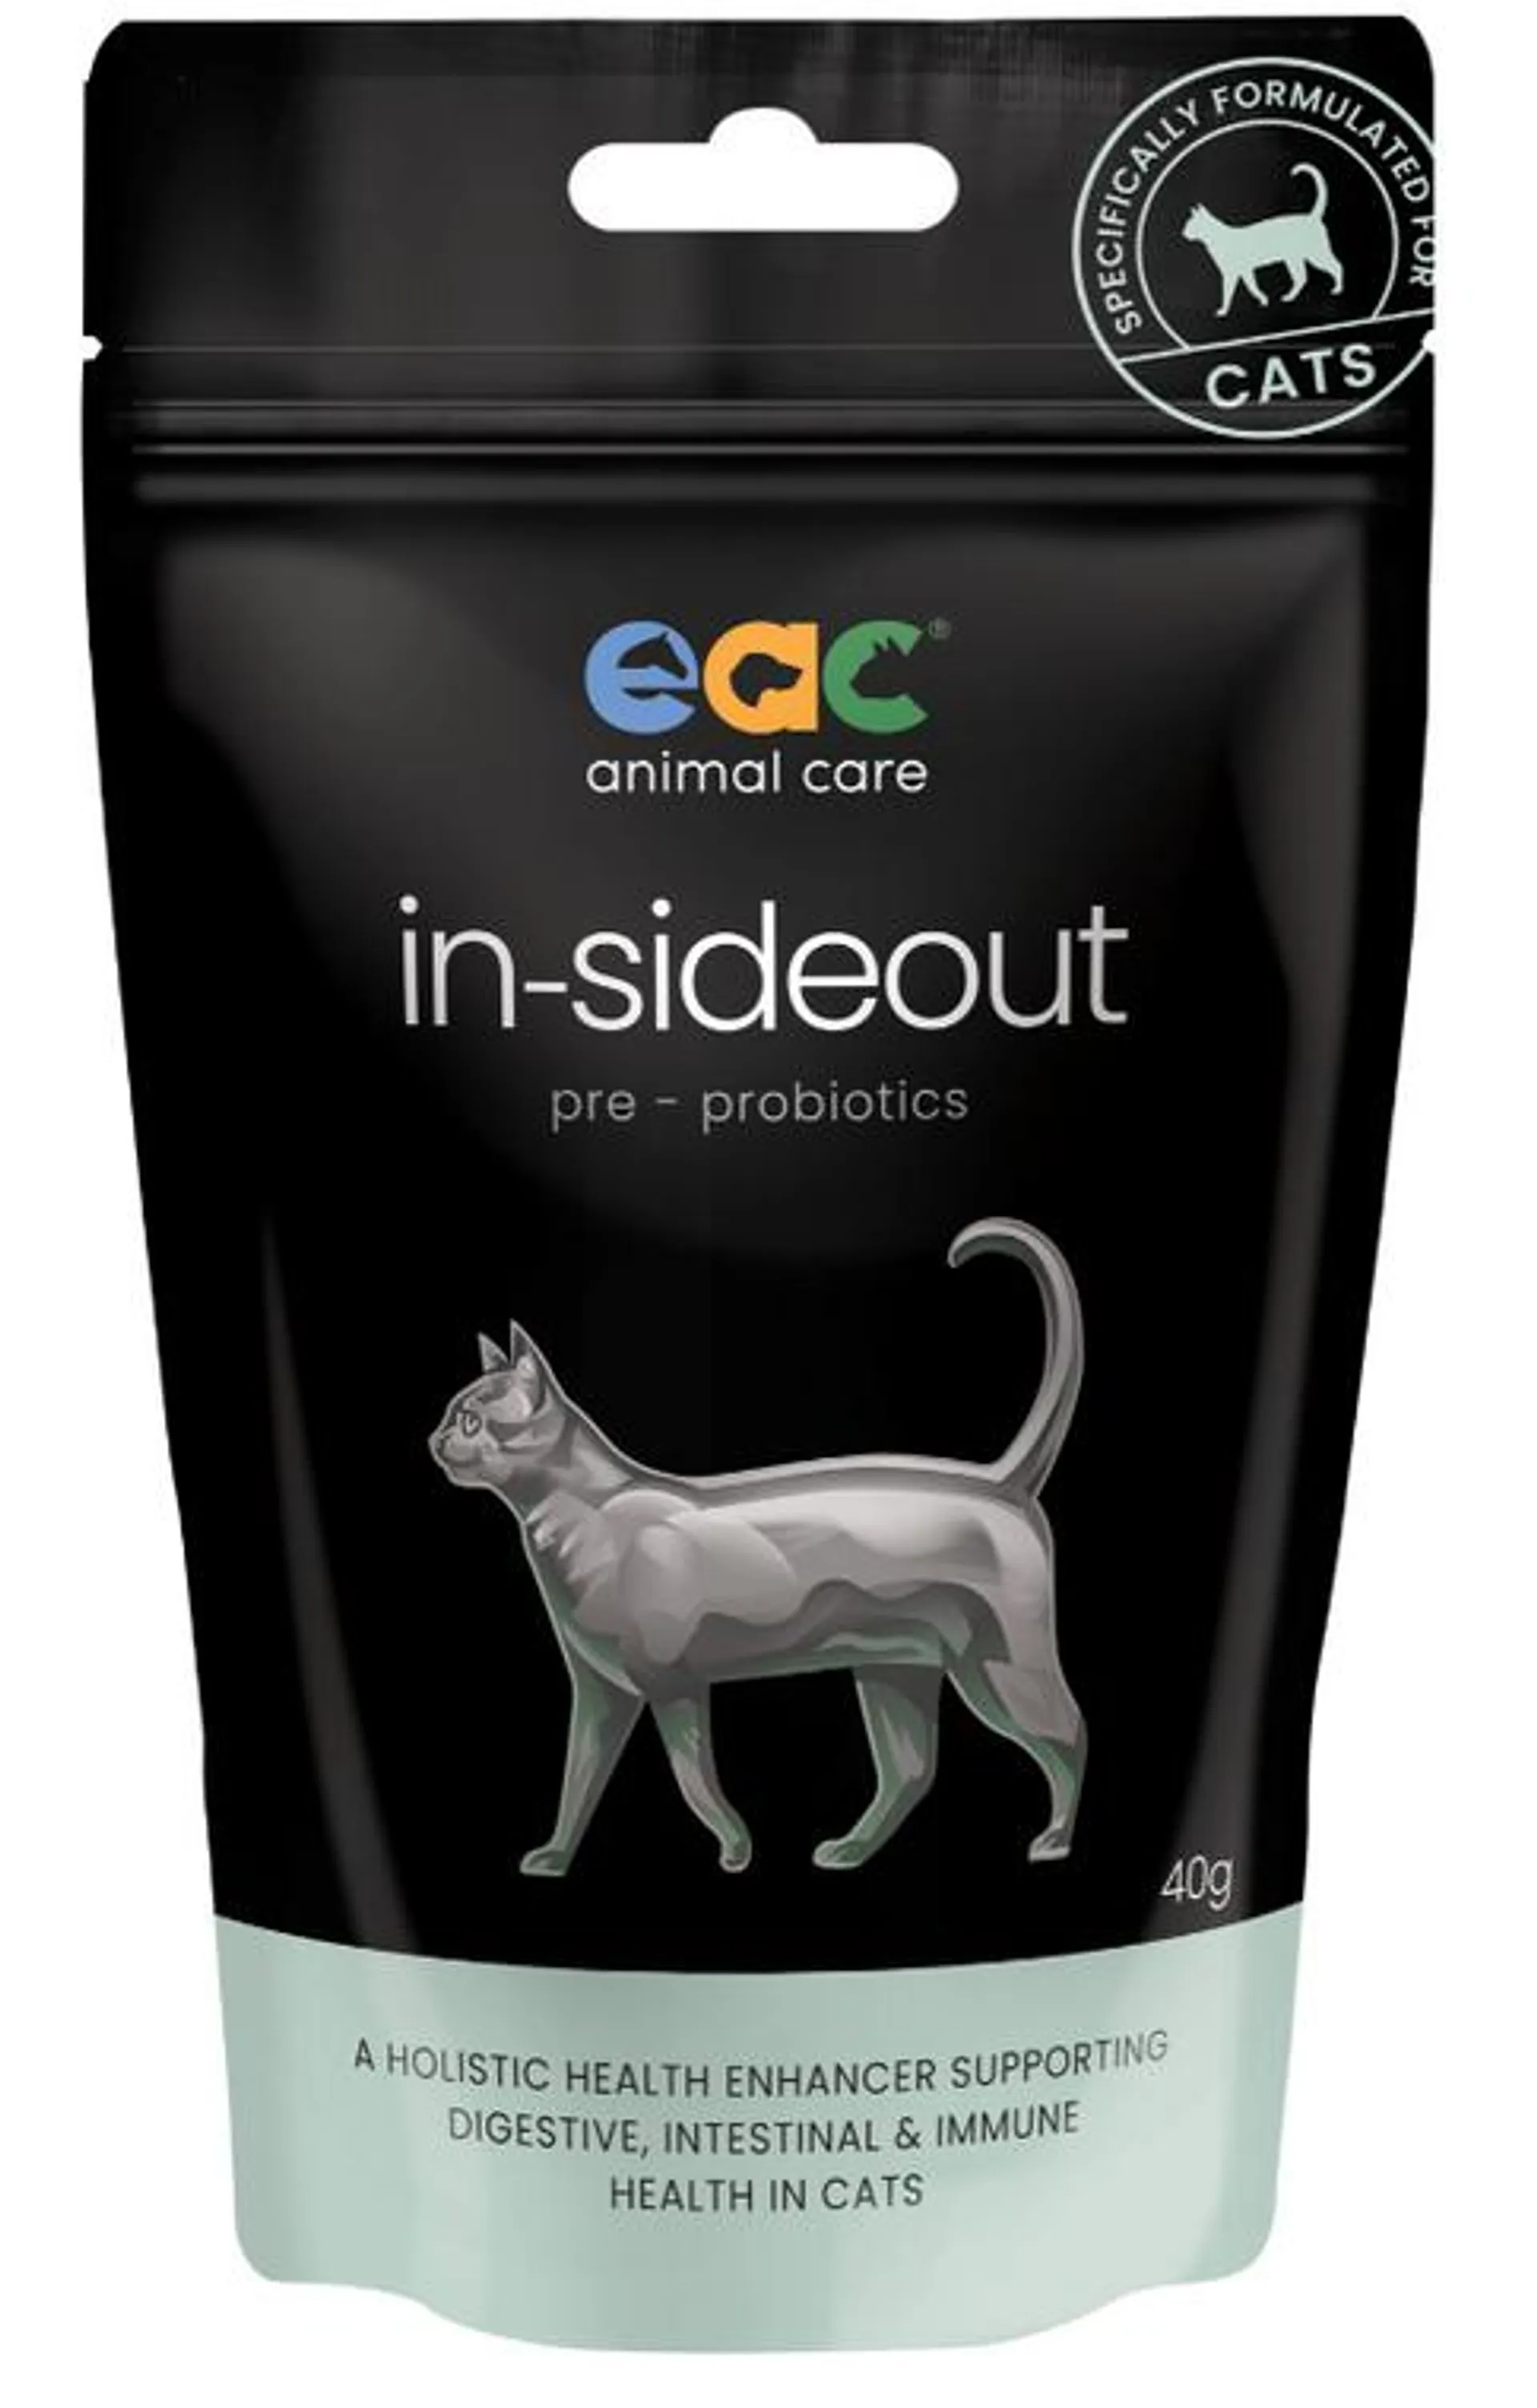 EAC In-sideout Cat - Pre and Probiotic supplement 40g